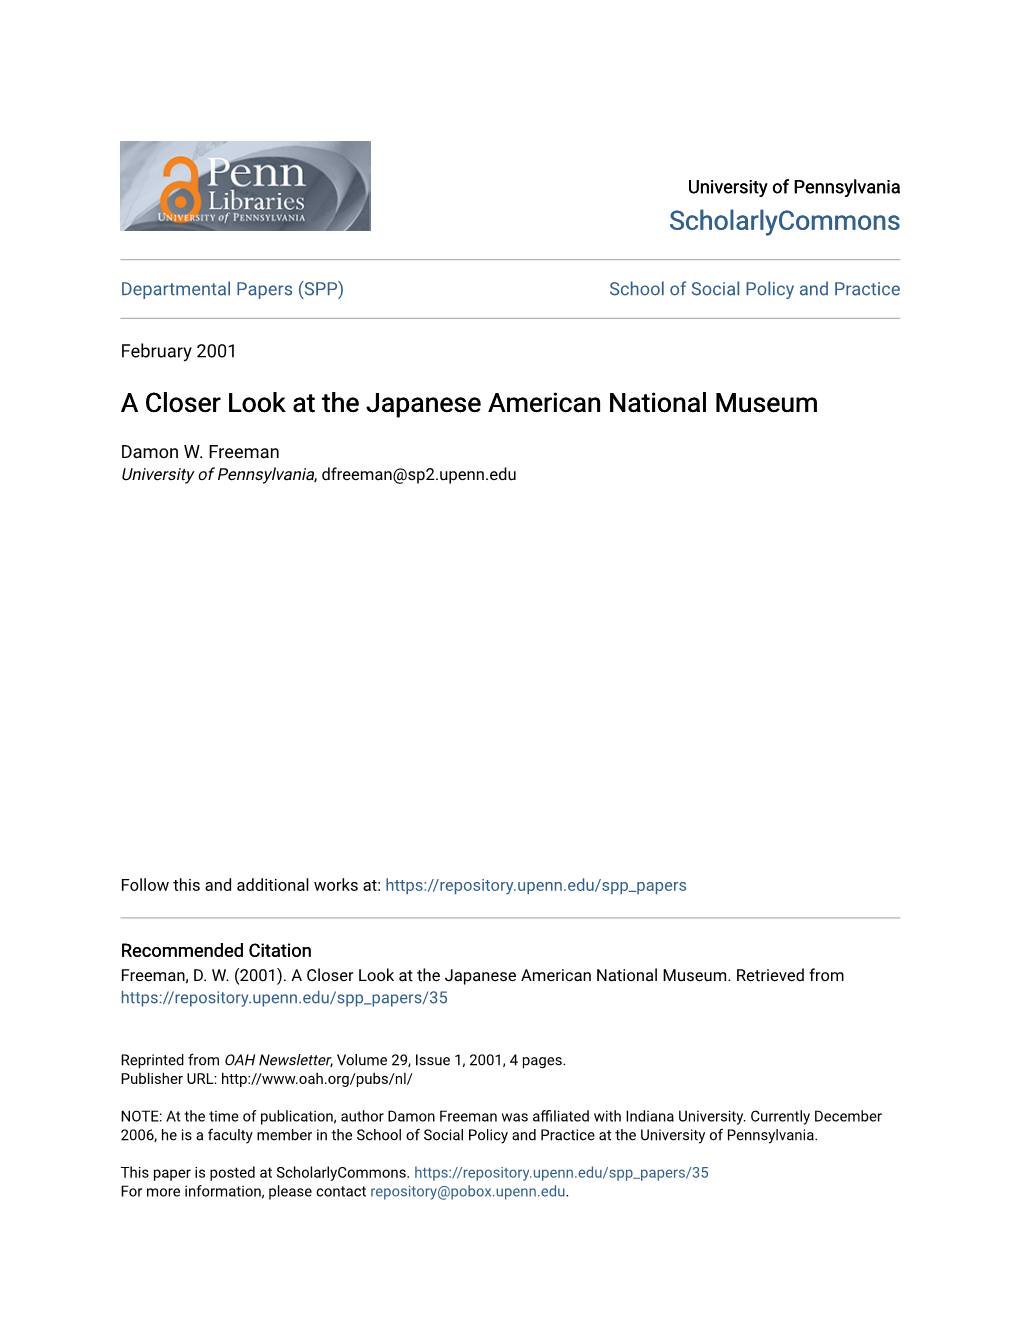 A Closer Look at the Japanese American National Museum